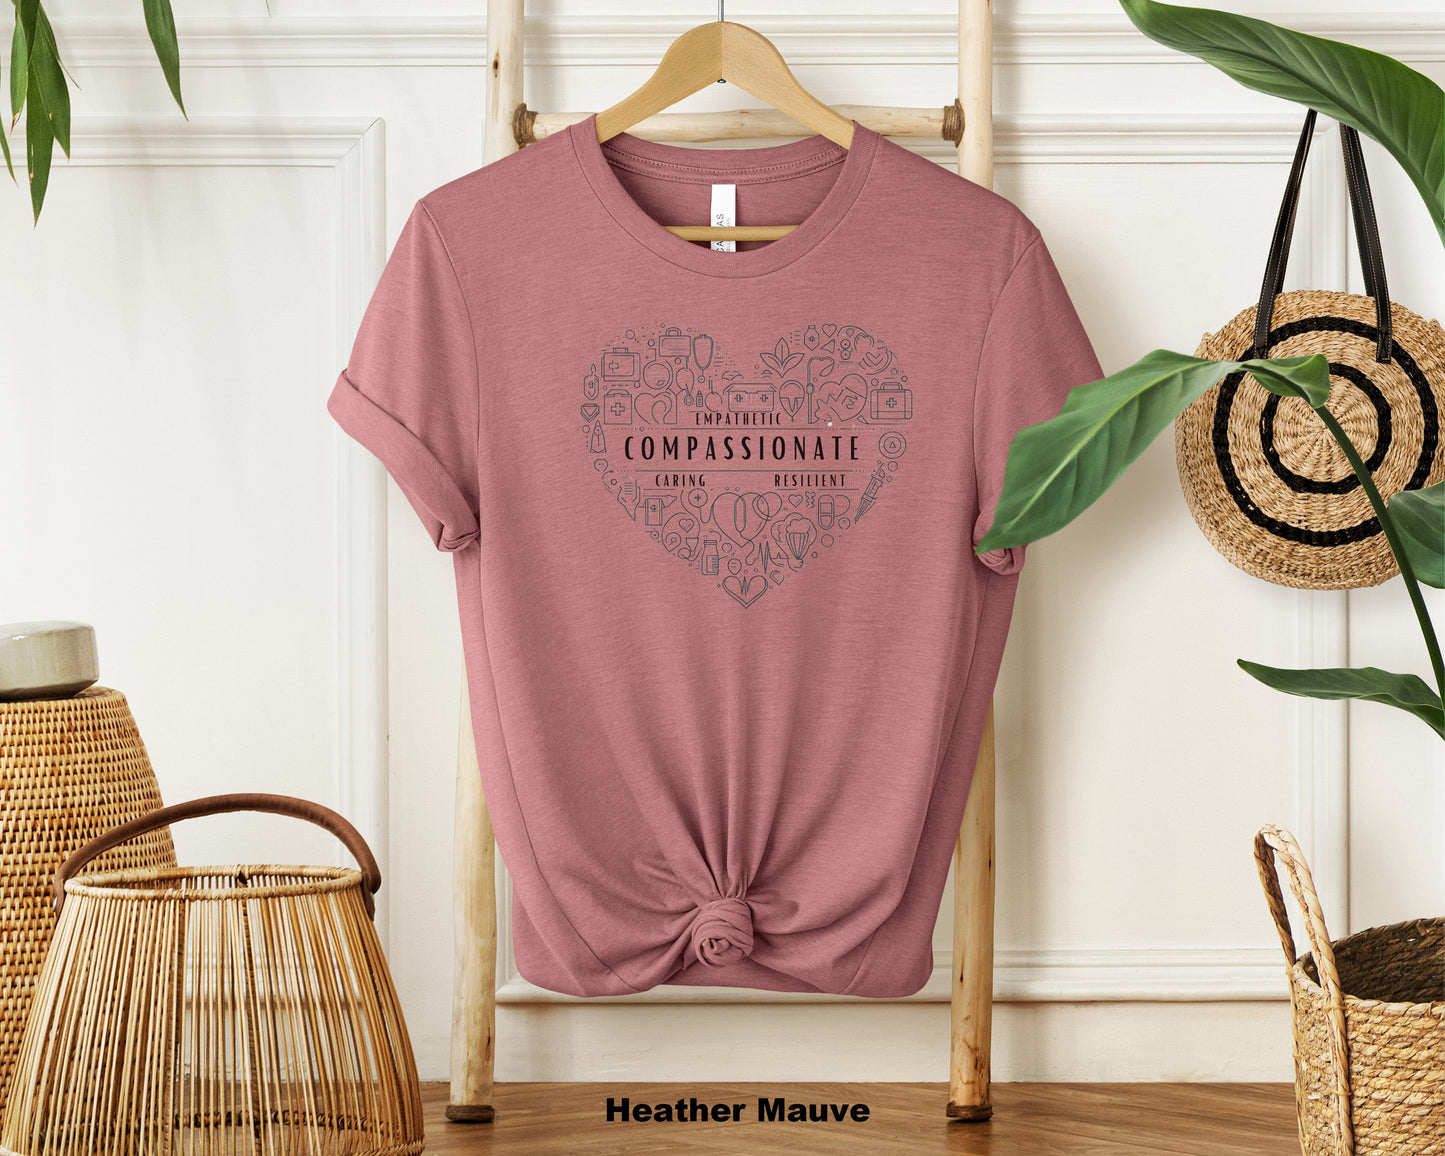 "Heart of Compassion: Classic Unisex Nurse T-Shirt in Soft Cotton with Quality Print"